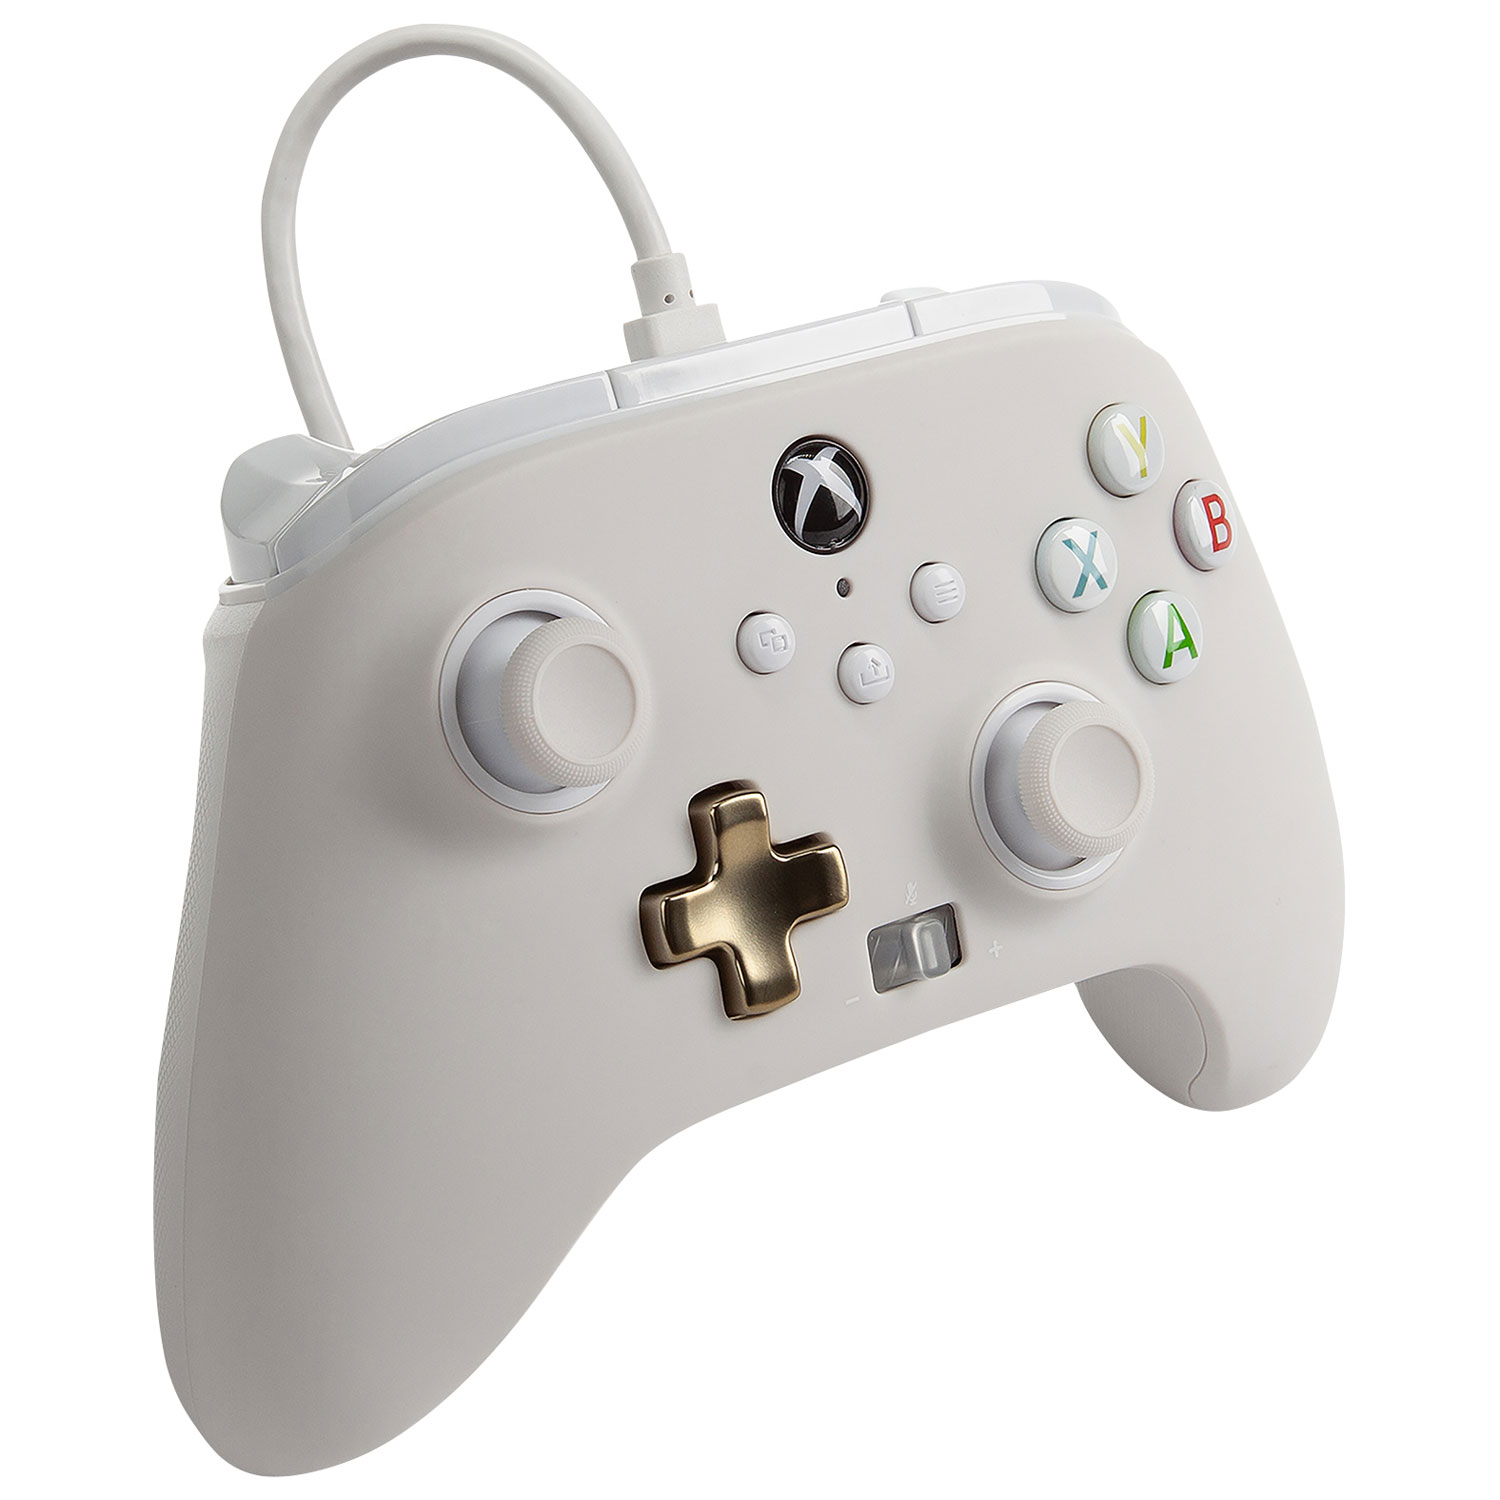 PowerA Mist Enhanced Wired Controller for Xbox Series X|S - White